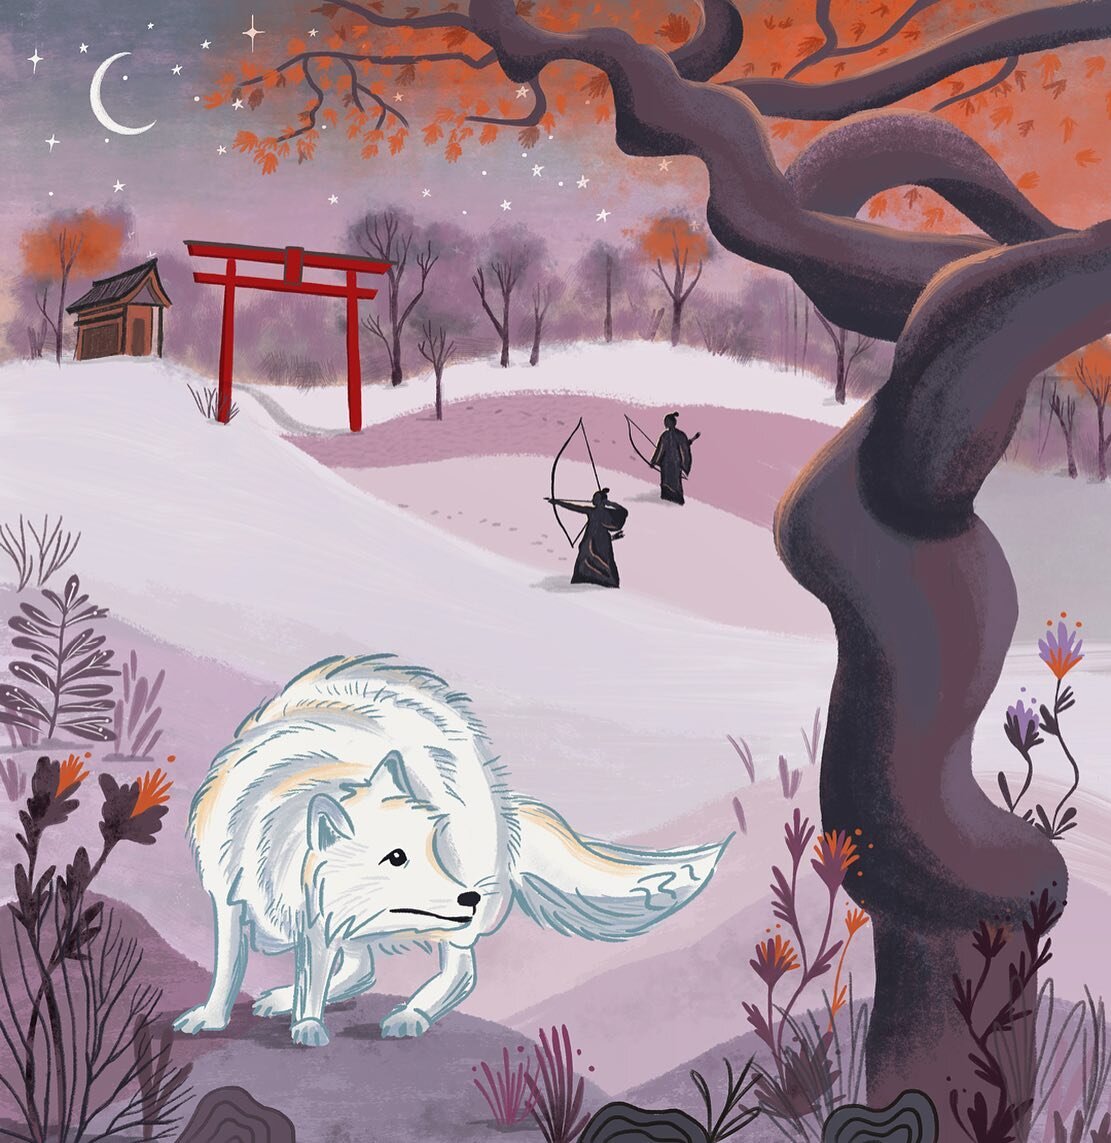 Some creative play this week illustrating a scene from the Japanese folktale: The Snow-White Inari Fox 🦊✨

@folktaleweek&rsquo;s first prompt of &ldquo;lost&rdquo; led to this opening scene of the rare white fox, who watched over the village, leadin